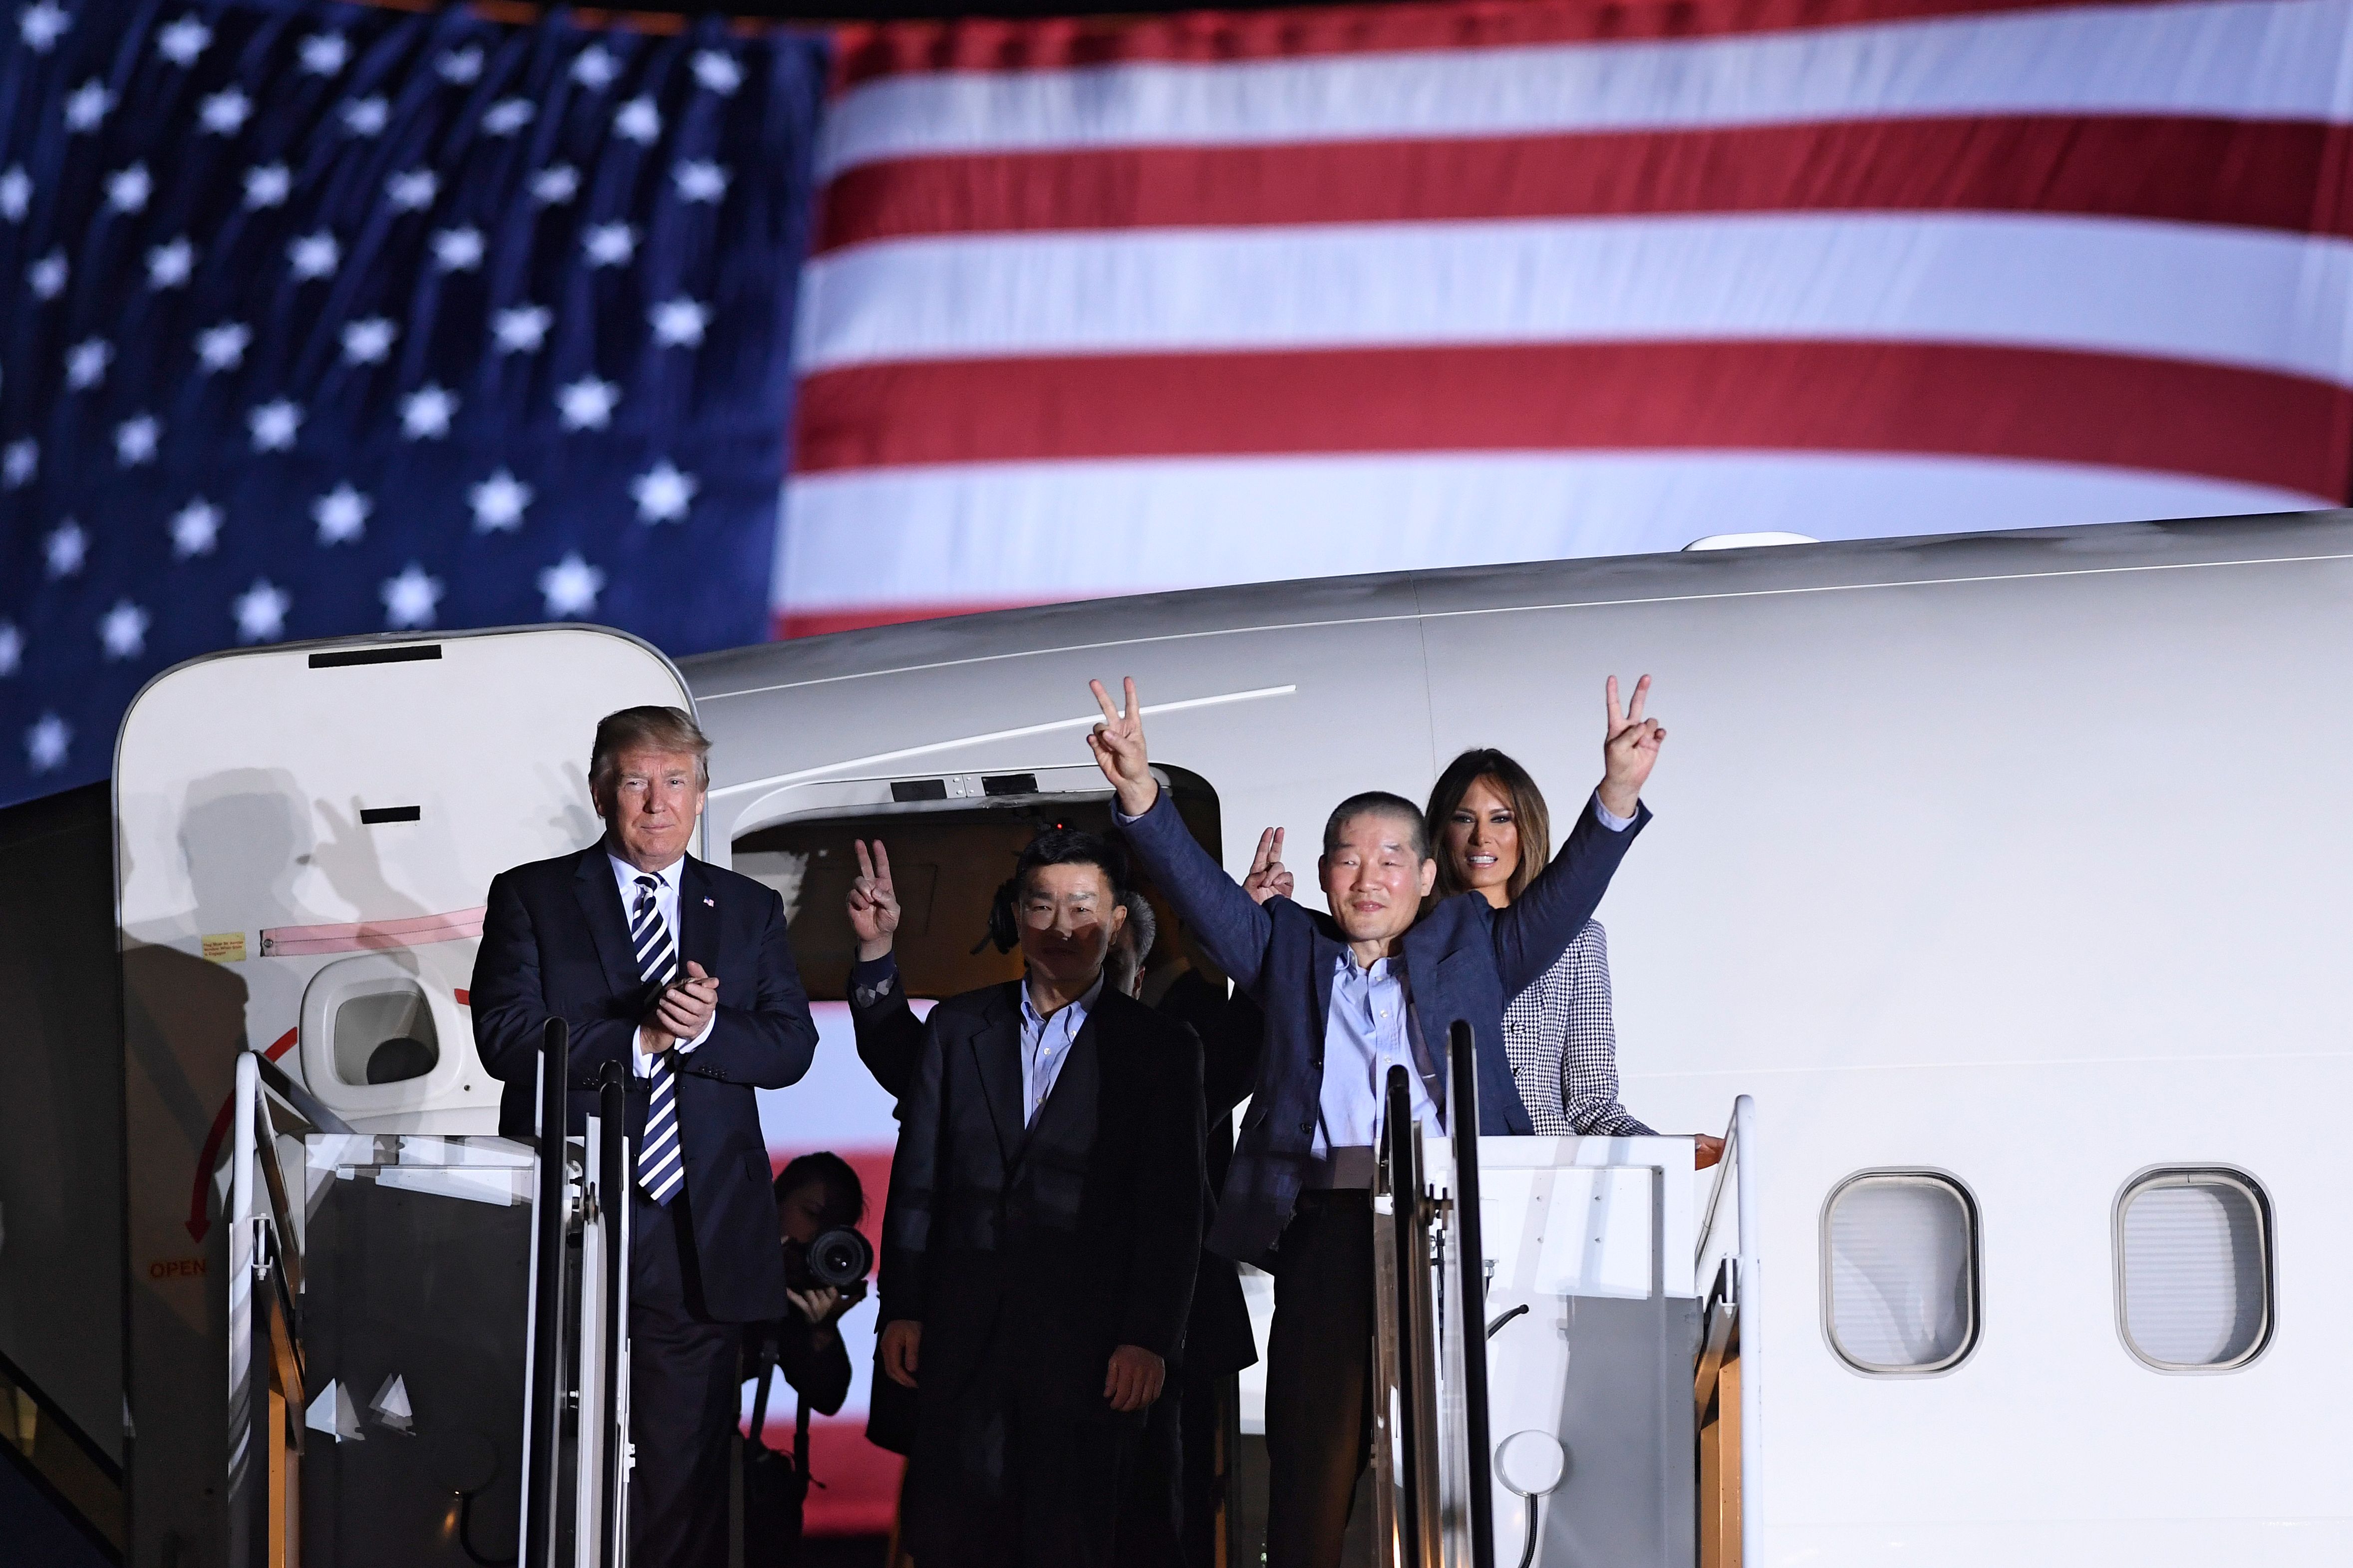 President Donald Trump applauds as Kim Dong-chul gestures upon his return with Kim Hak-song and Tony Kim after they were freed by North Korea, at Joint Base Andrews in Maryland on May 10, 2018. (Saul LoebA—AFP/Getty Images)